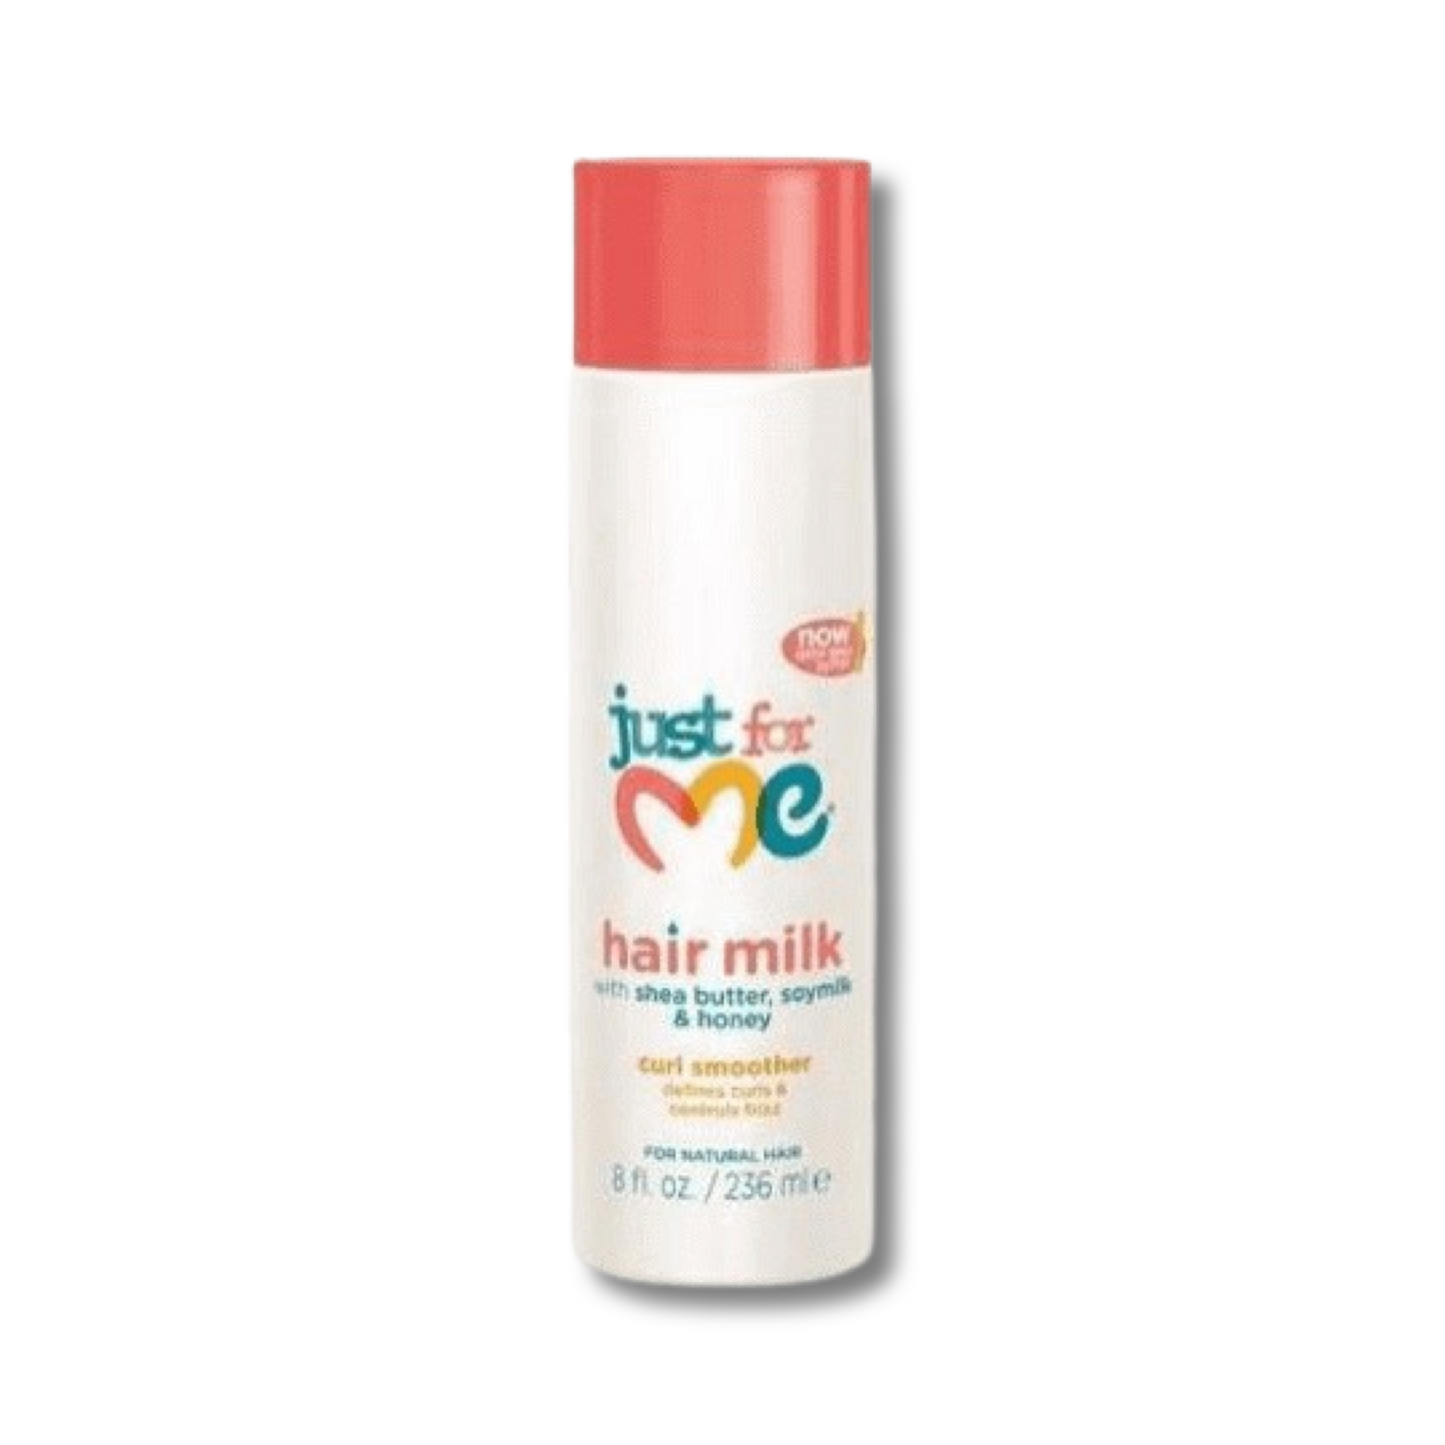 Just For Me Hair Milk Curl Smoother - 8 Oz